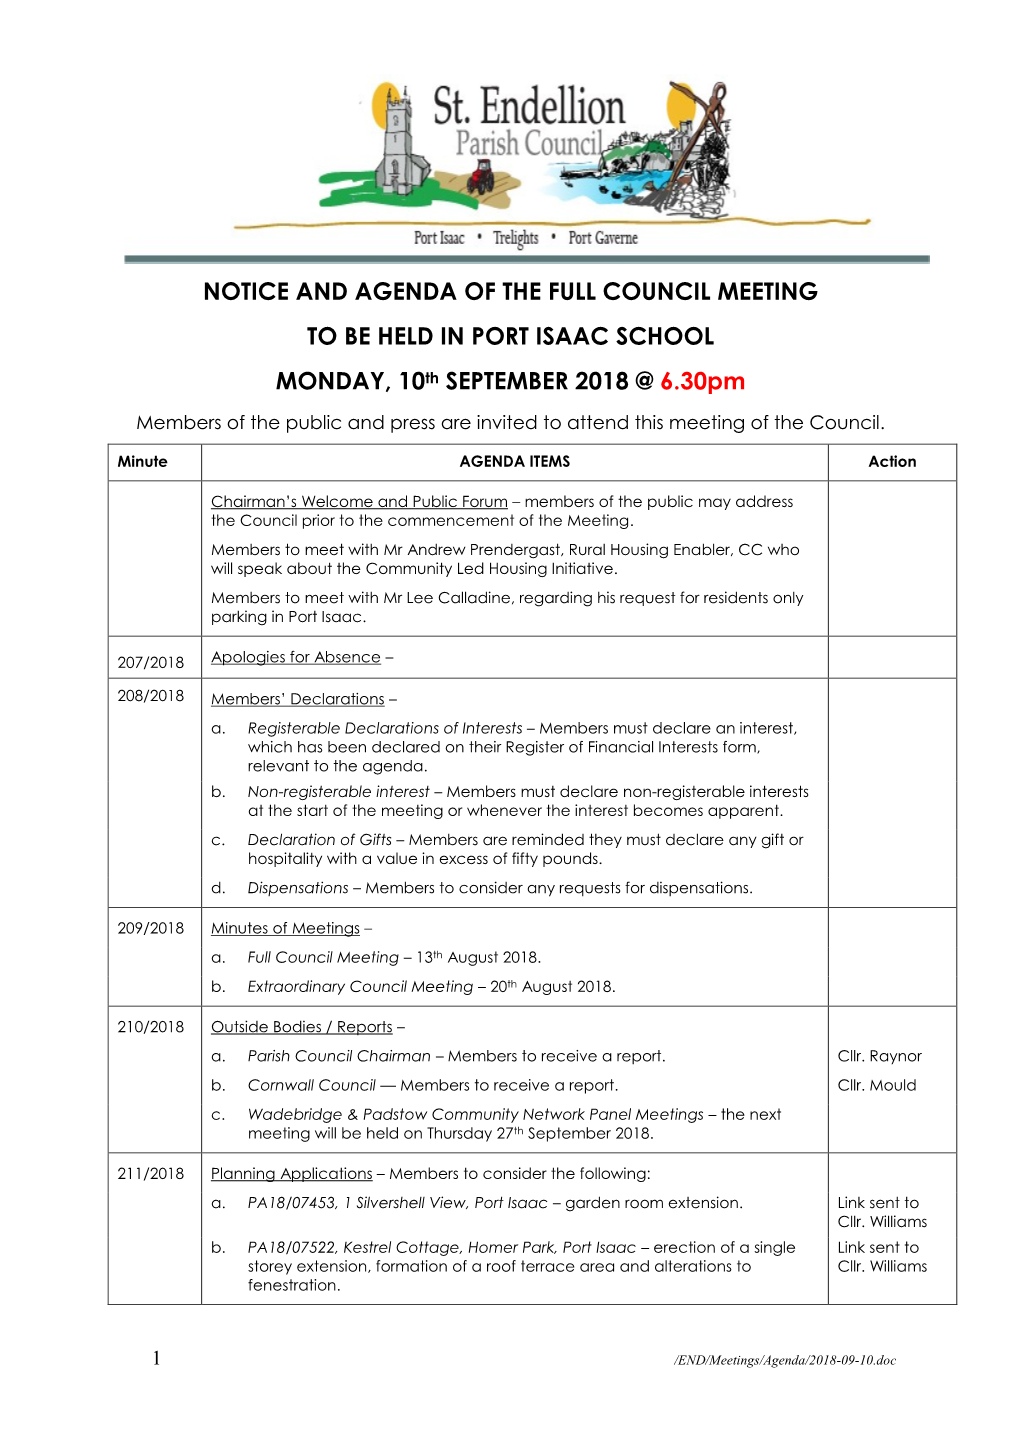 NOTICE and AGENDA of the FULL COUNCIL MEETING to BE HELD in PORT ISAAC SCHOOL MONDAY, 10Th SEPTEMBER 2018 @ 6.30Pm